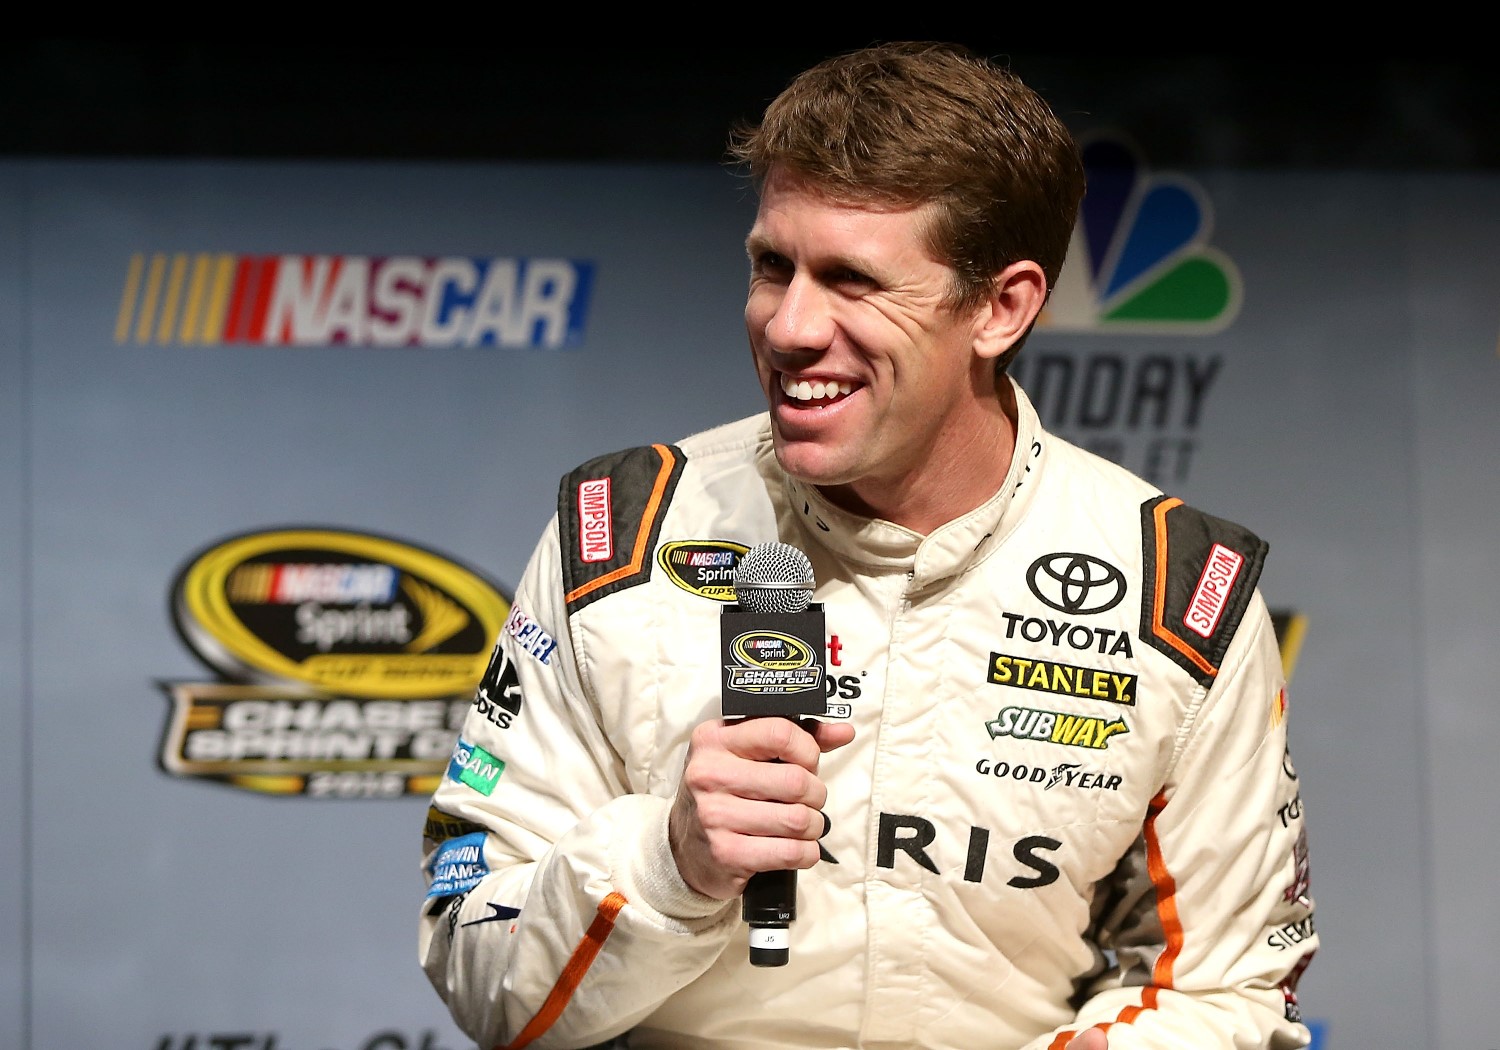 Carl Edwards has finished runner-up in the championship twice